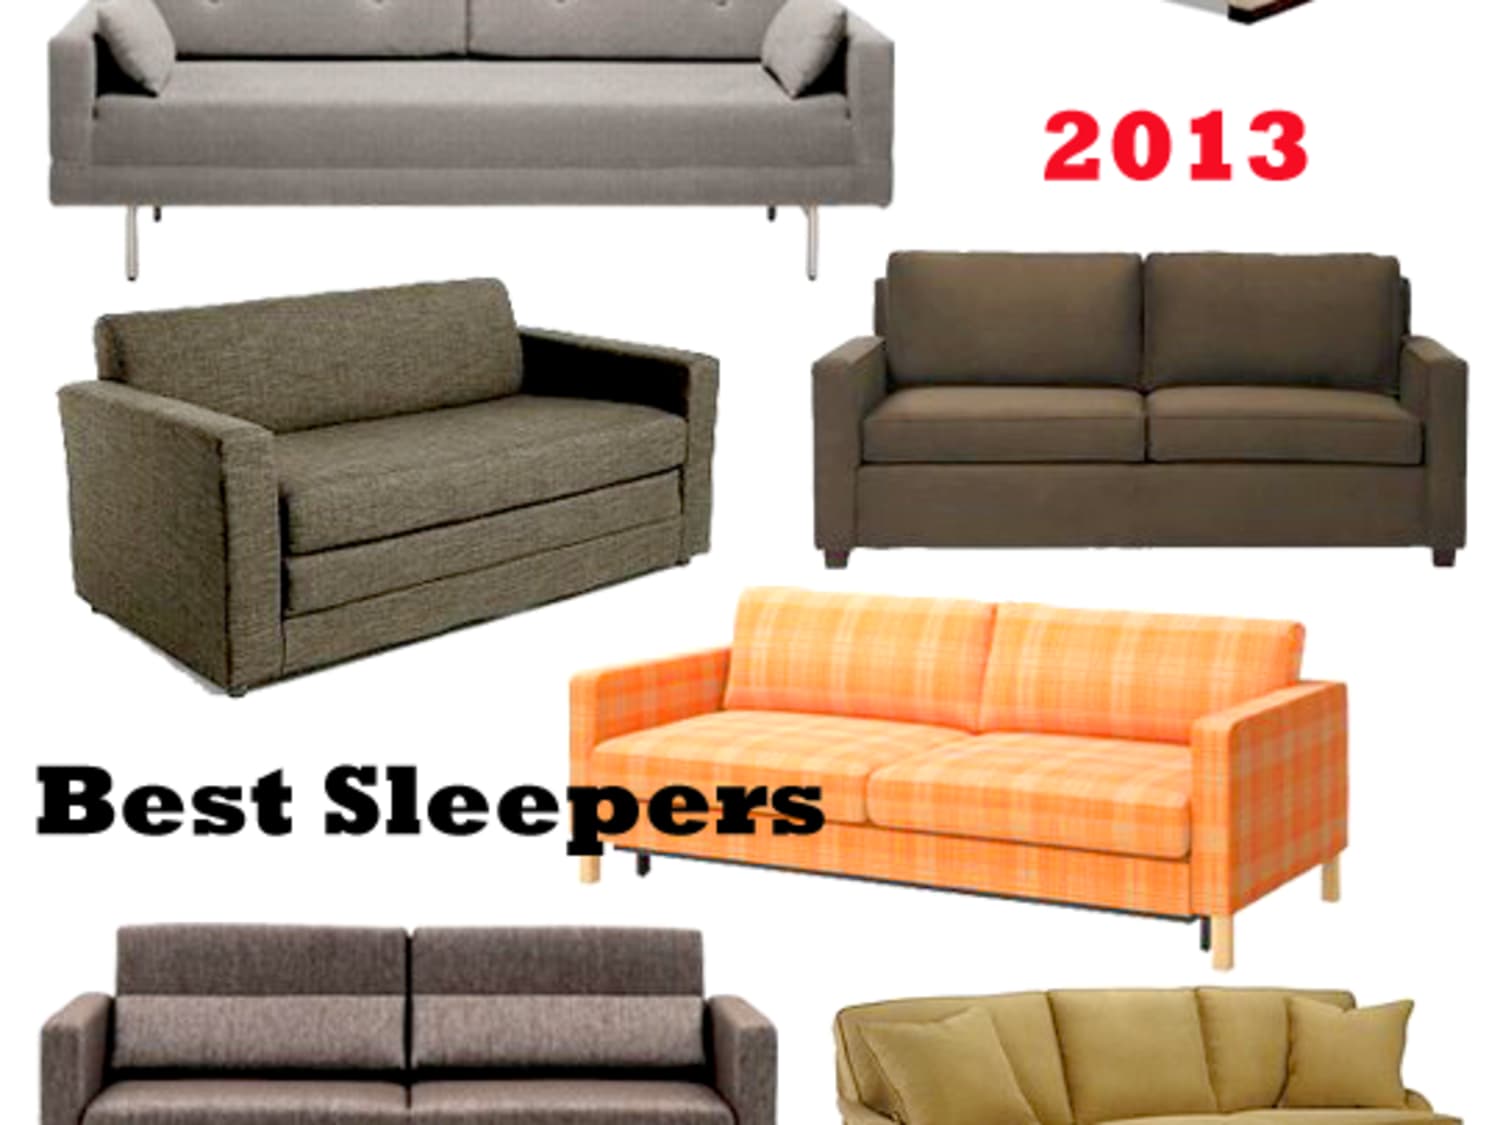 16 Best Sleeper Sofas Sofa Beds 2013 Apartment Therapy